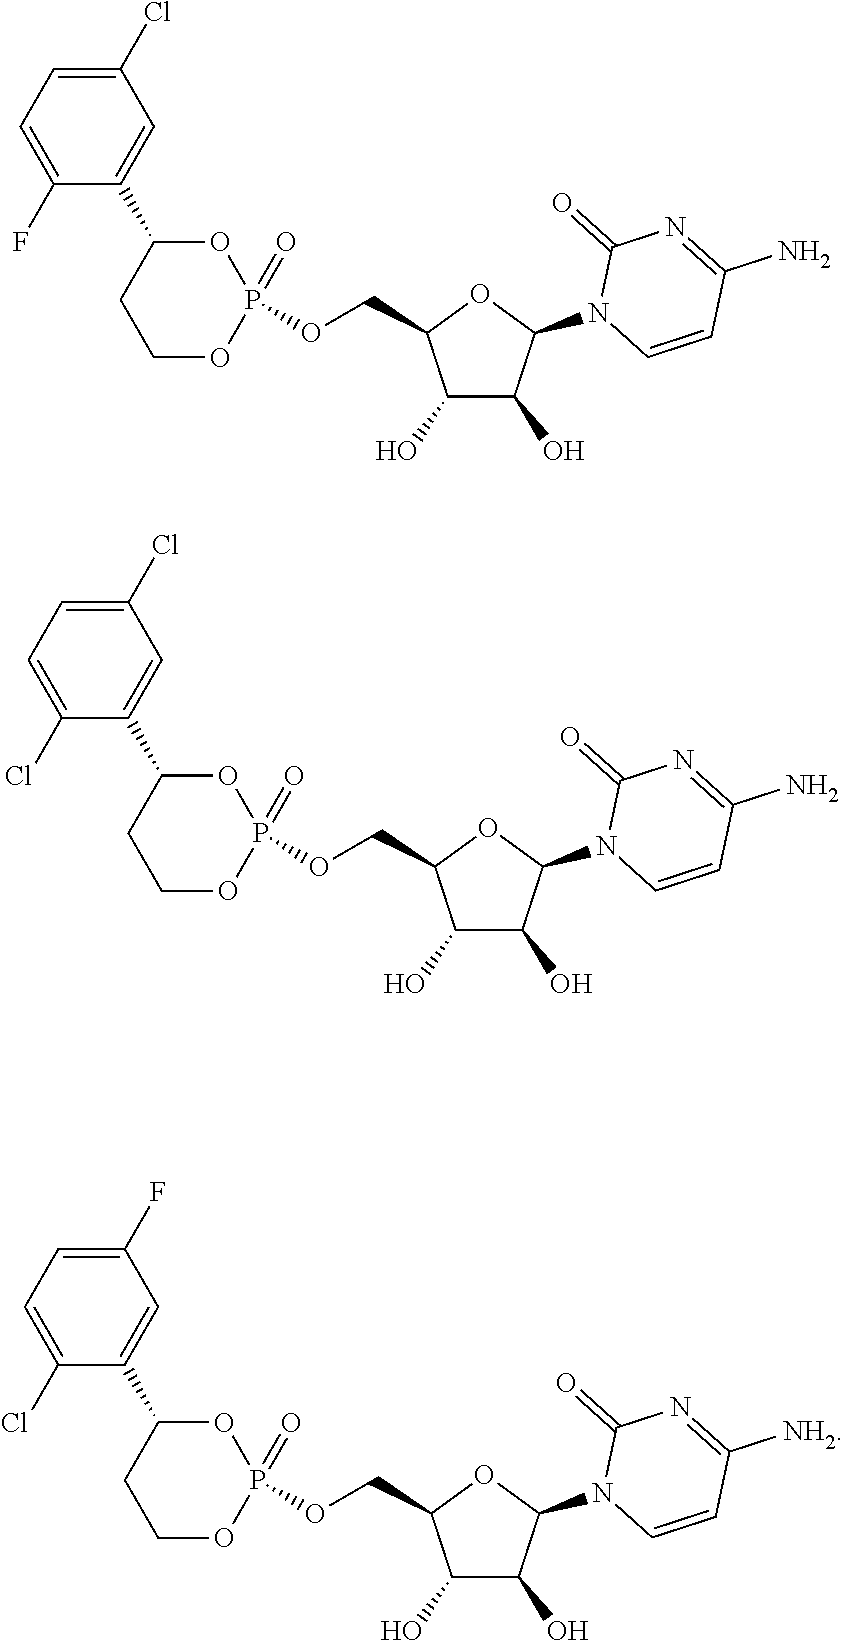 Cytarabine prodrug nucleoside cyclic phosphate compound based on liverspecific delivery and use